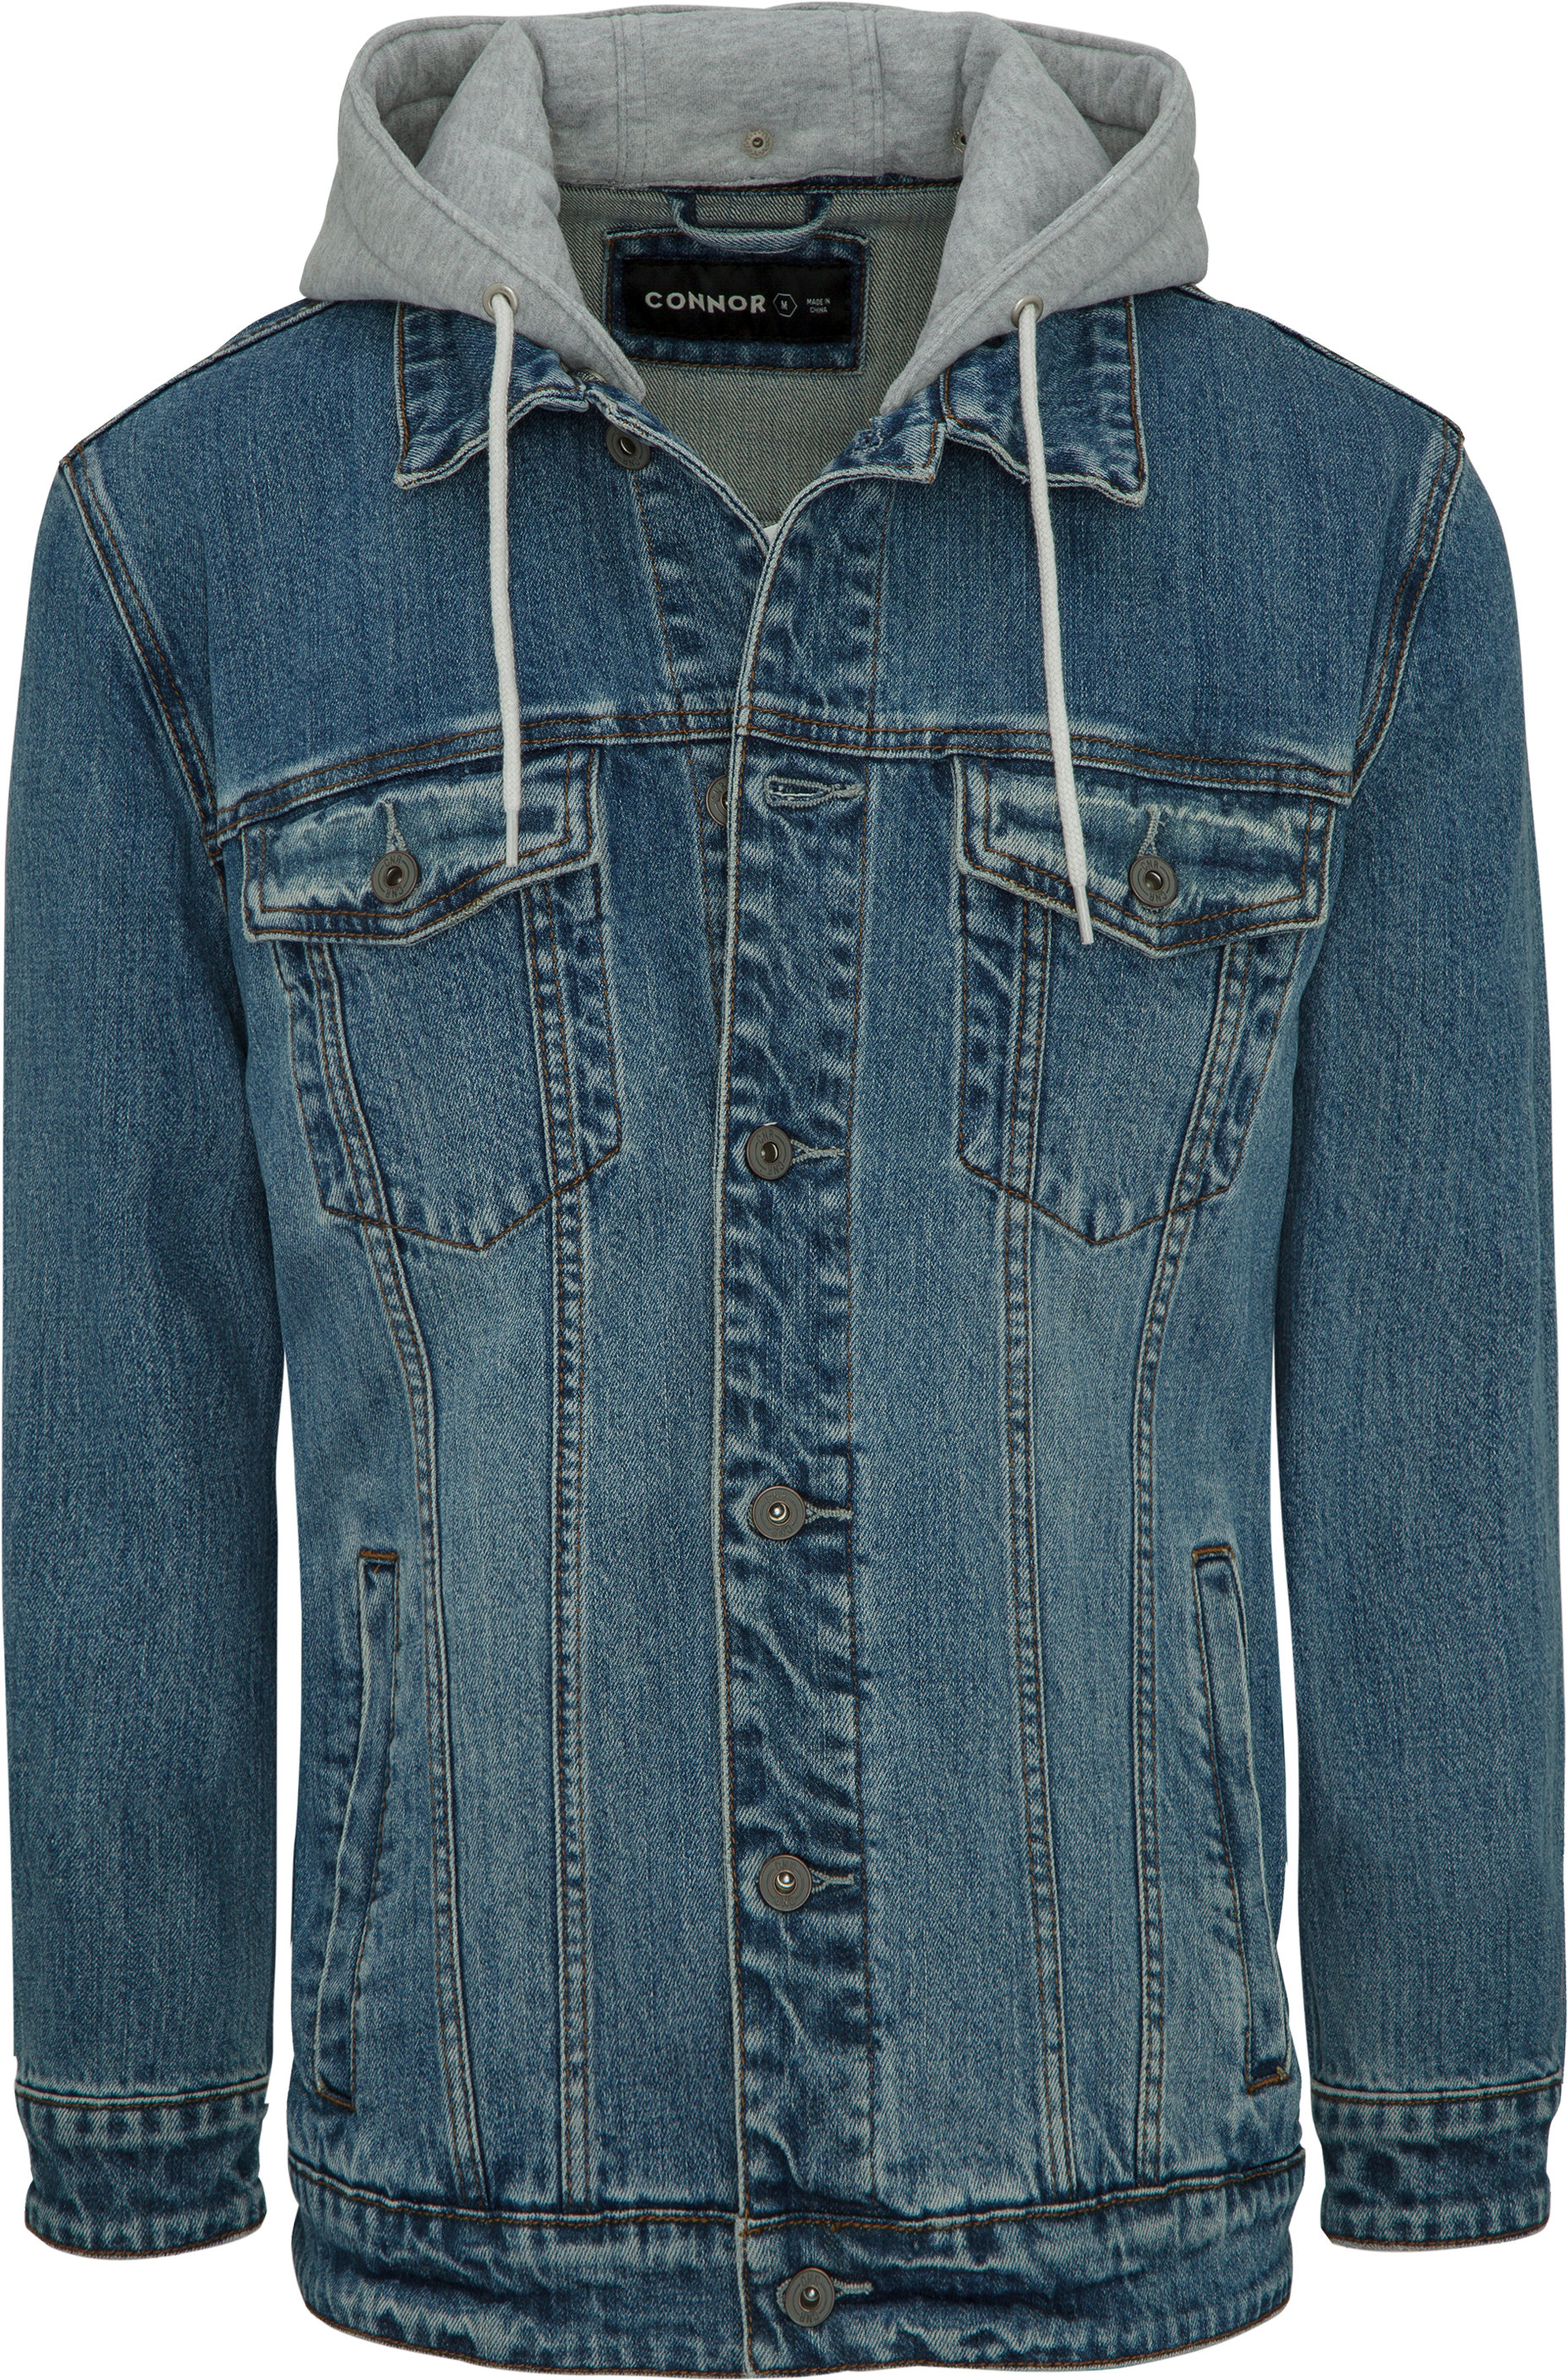 A Denim Jacket With A White String